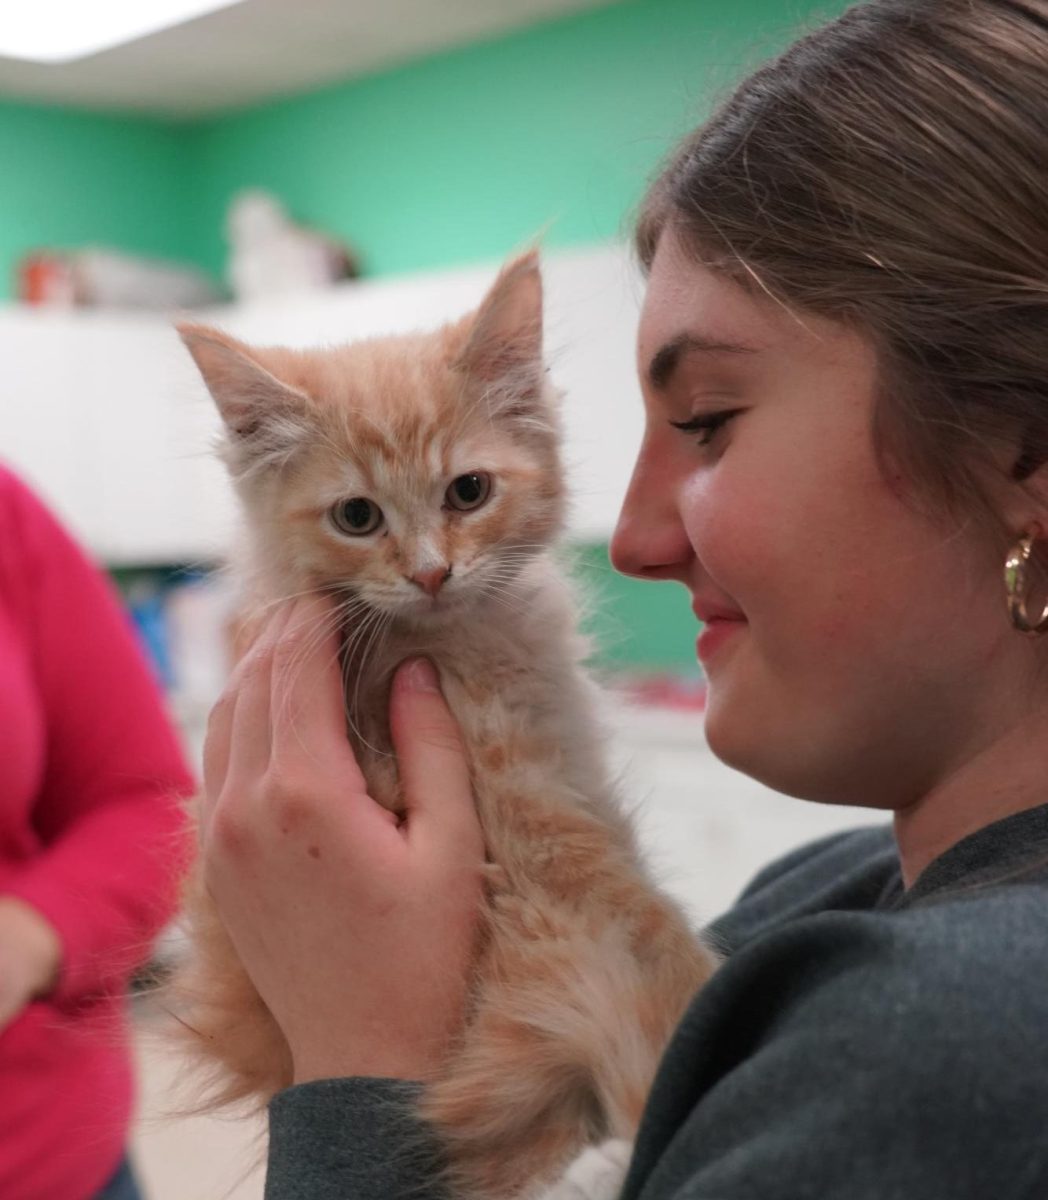 Snuggling+an+orange+kitten%2C+sophomore+Madelyn+McBride+witnesses+first-hand+the+animals+that+they+are+helping.+%E2%80%9CWe+learned+about+what+the+animals+went+through+before+they+got+to+the+shelter%2C+and+we+also+got+to+see+the+horses+and+kittens%2C%E2%80%9D+McBride+said.+%E2%80%9CThe+kittens+were+my+favorite%2C+because+they+were+so+cute+and+soft.%E2%80%9D+This+was+McBride%E2%80%99s+first+visit+to+the+Humane+Society+of+Macomb.+photo+by+natalie+garwood